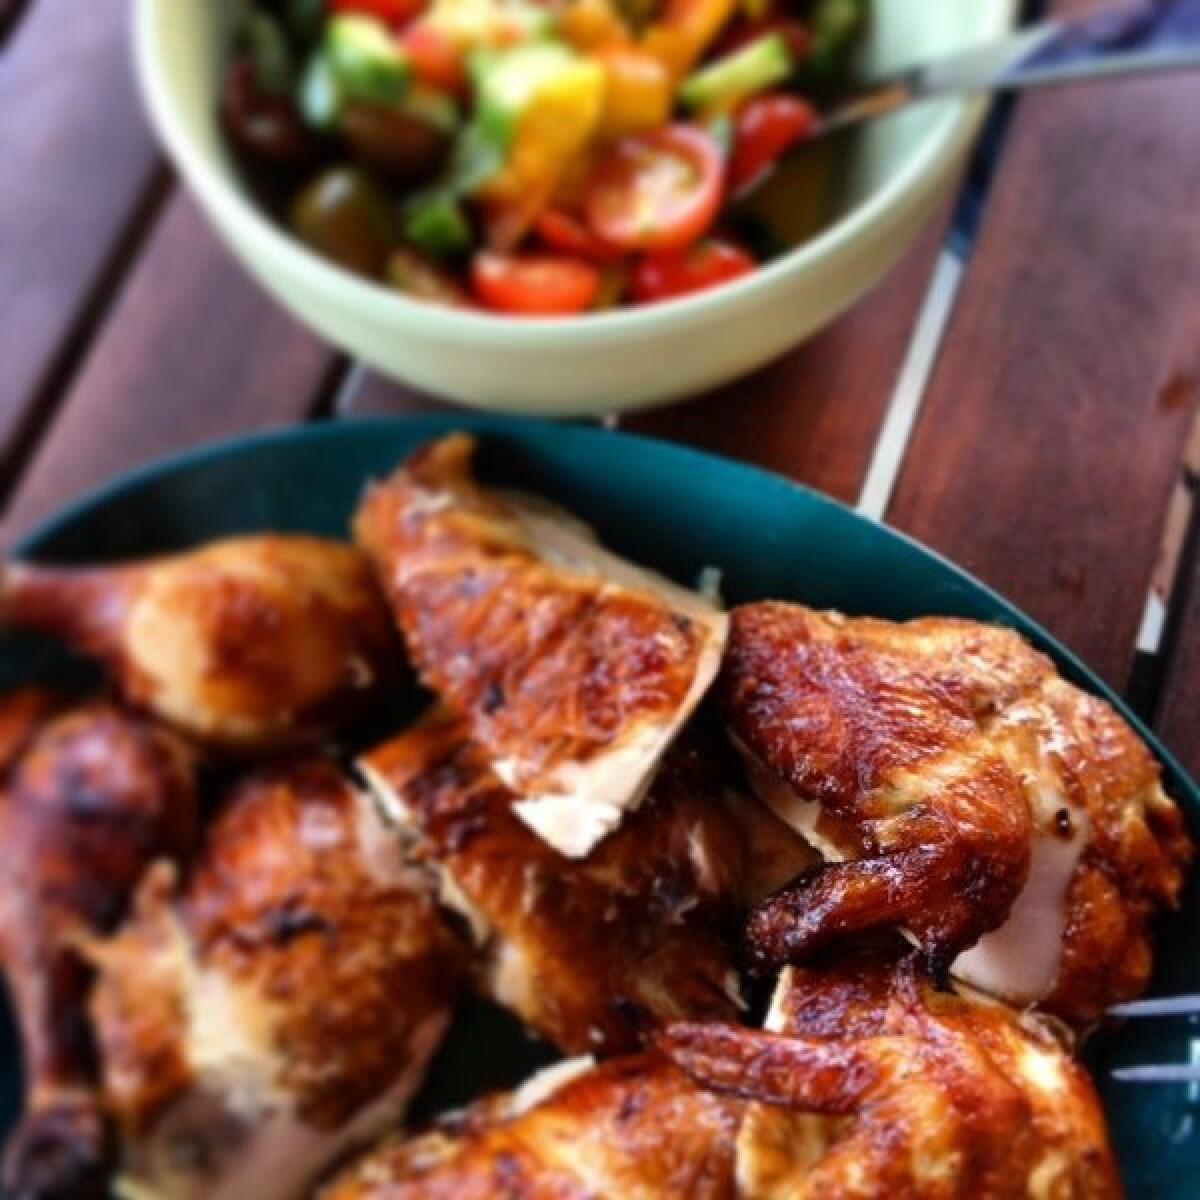 Smoked chicken from the rotisserie, served with a tomato salad.